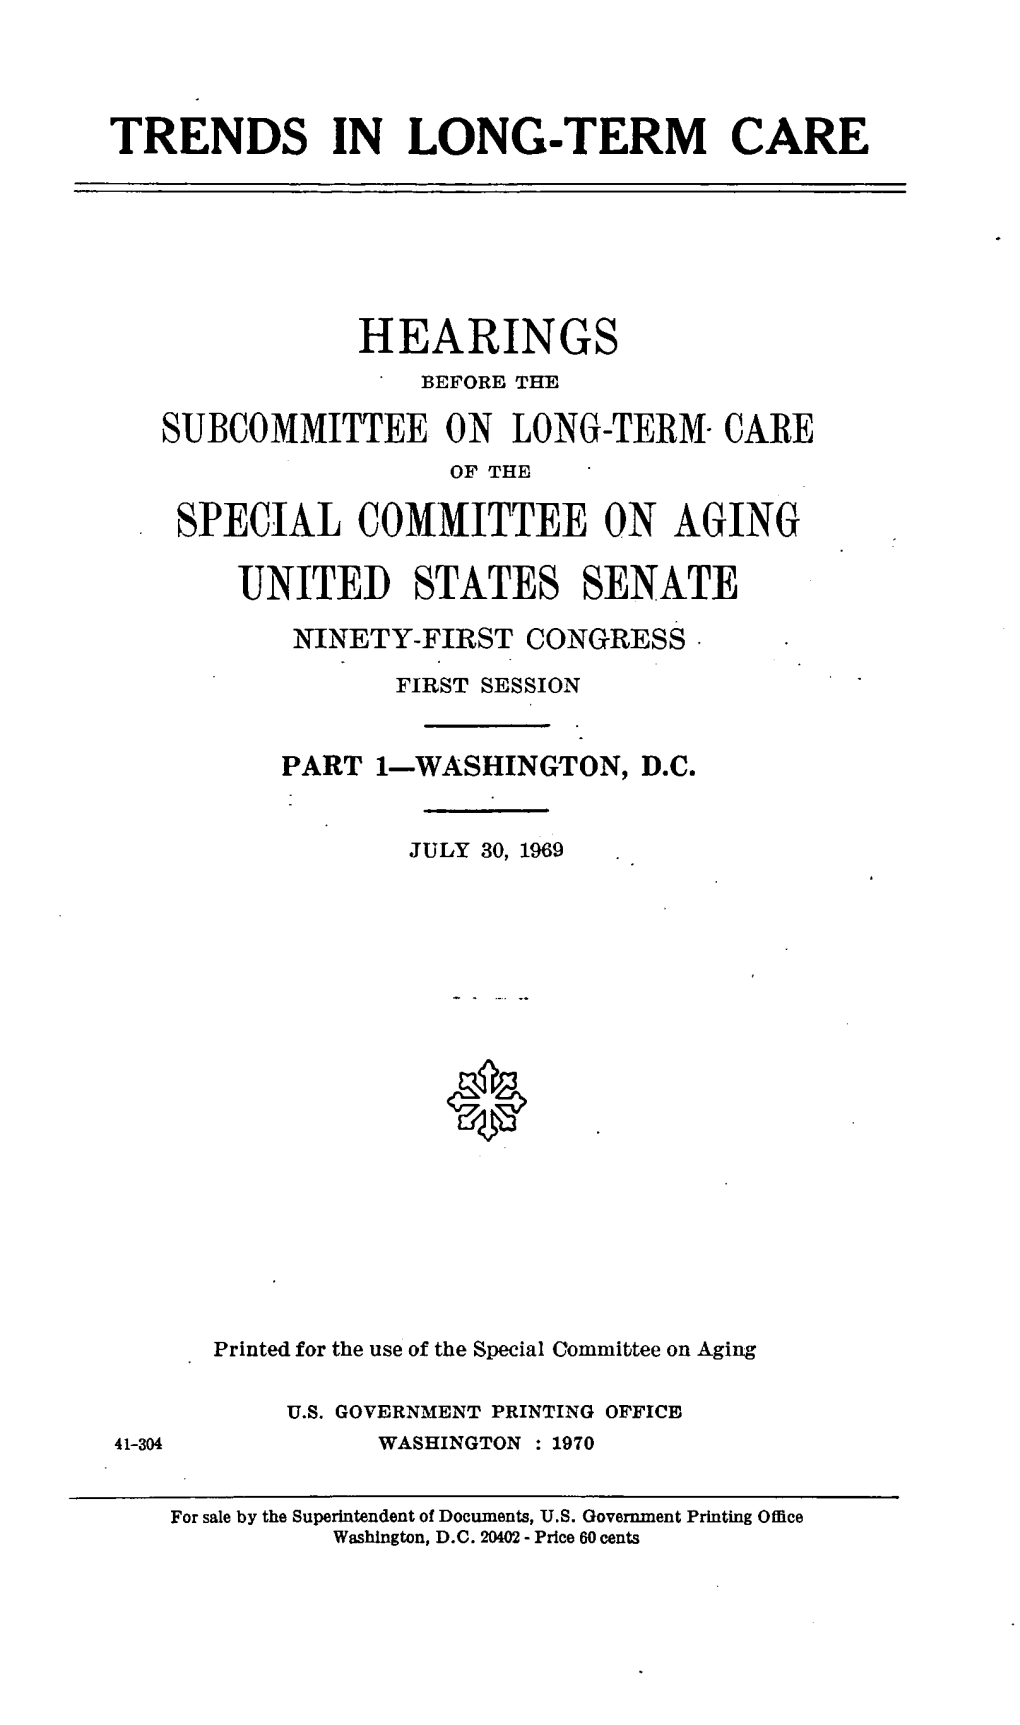 Trends in Long-Term Care Hearings